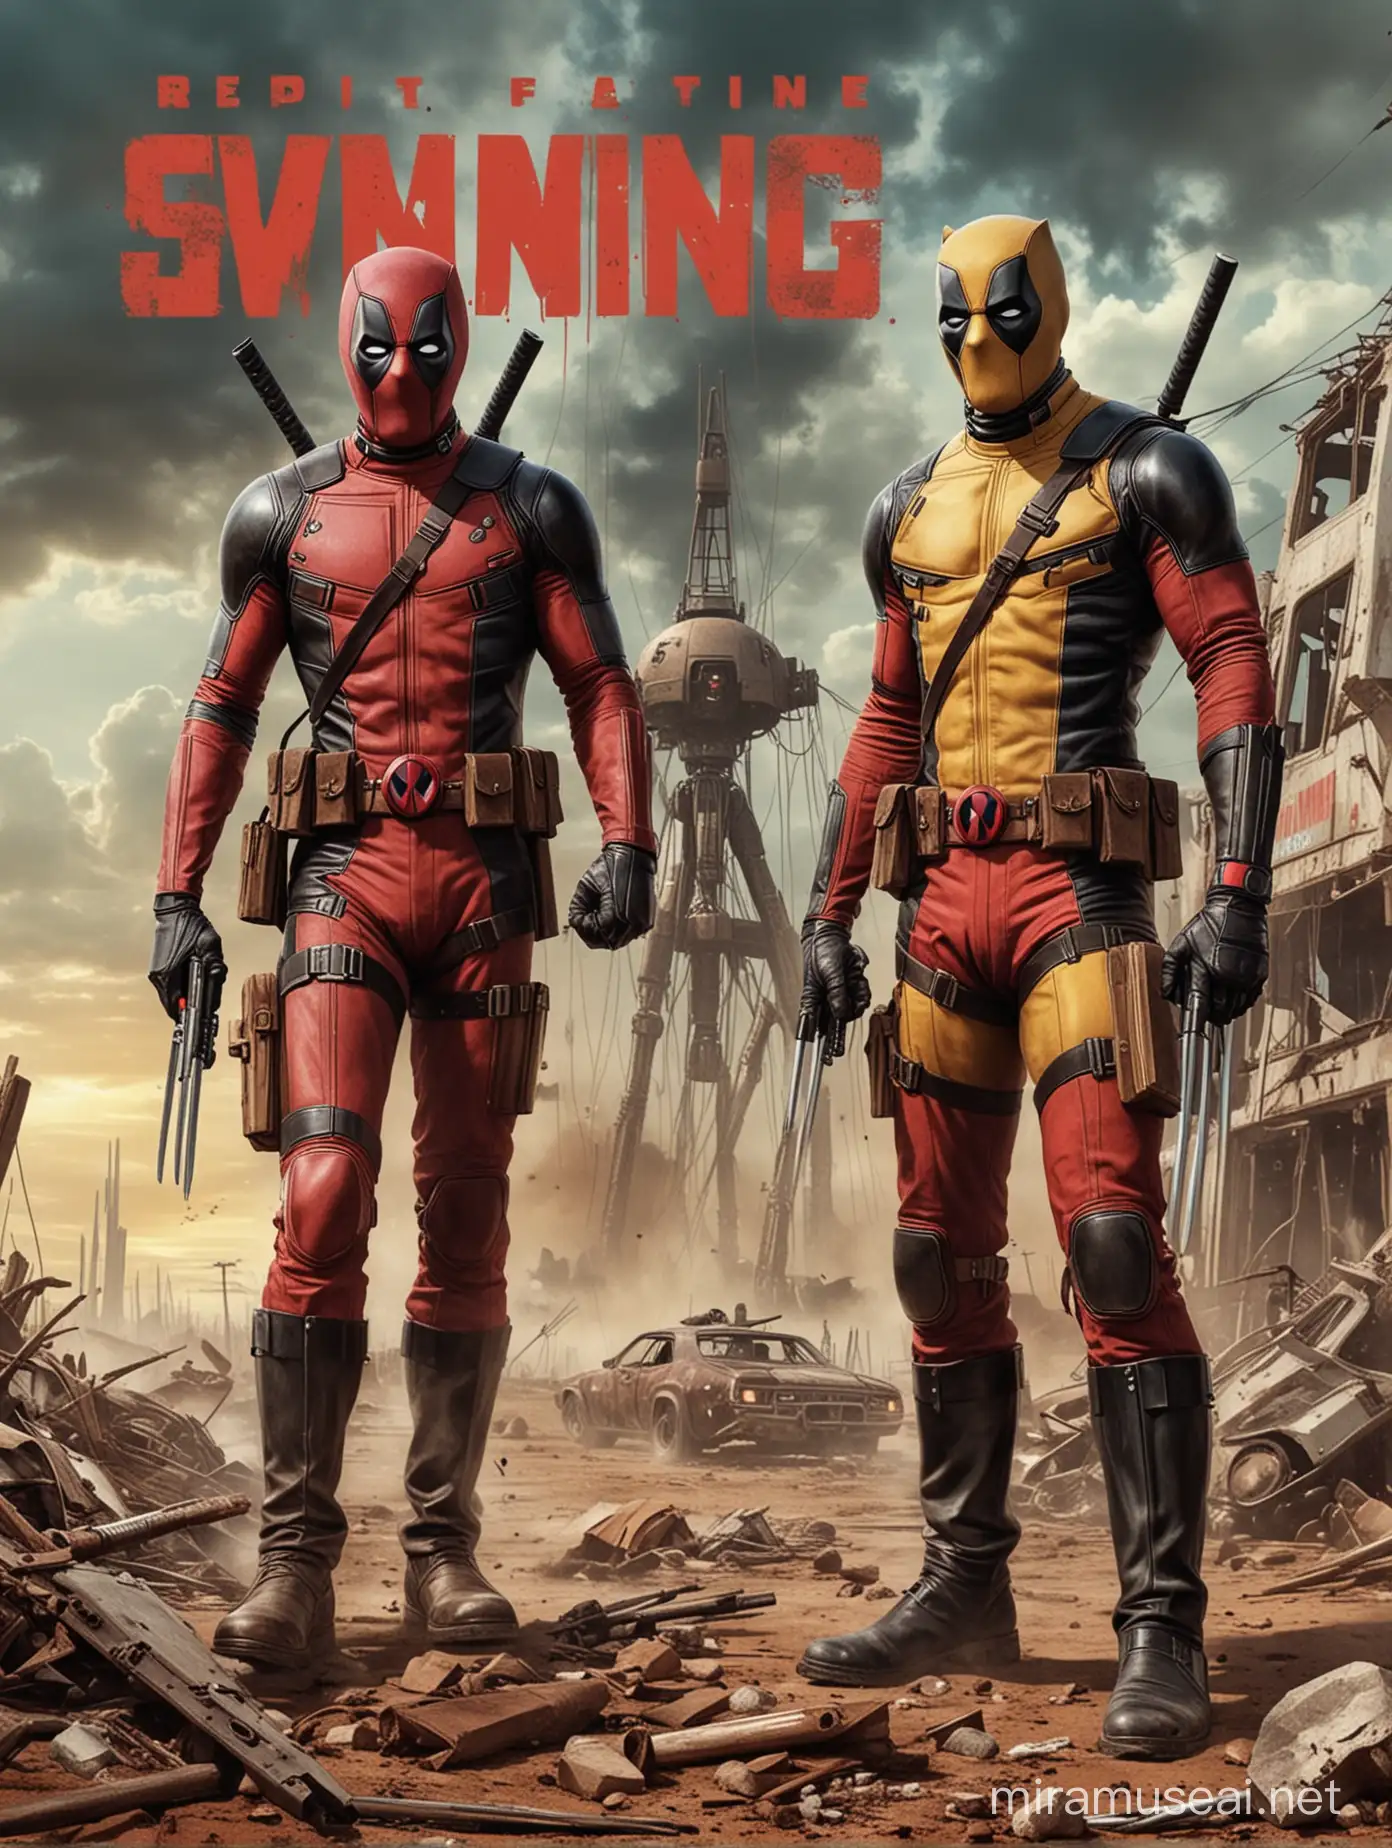 Deadpool and wolverine in dystopia post apocalyptic in time travel time machine war of the worlds the shining star wars epic legend, poster classic style art old pulp fiction cover 